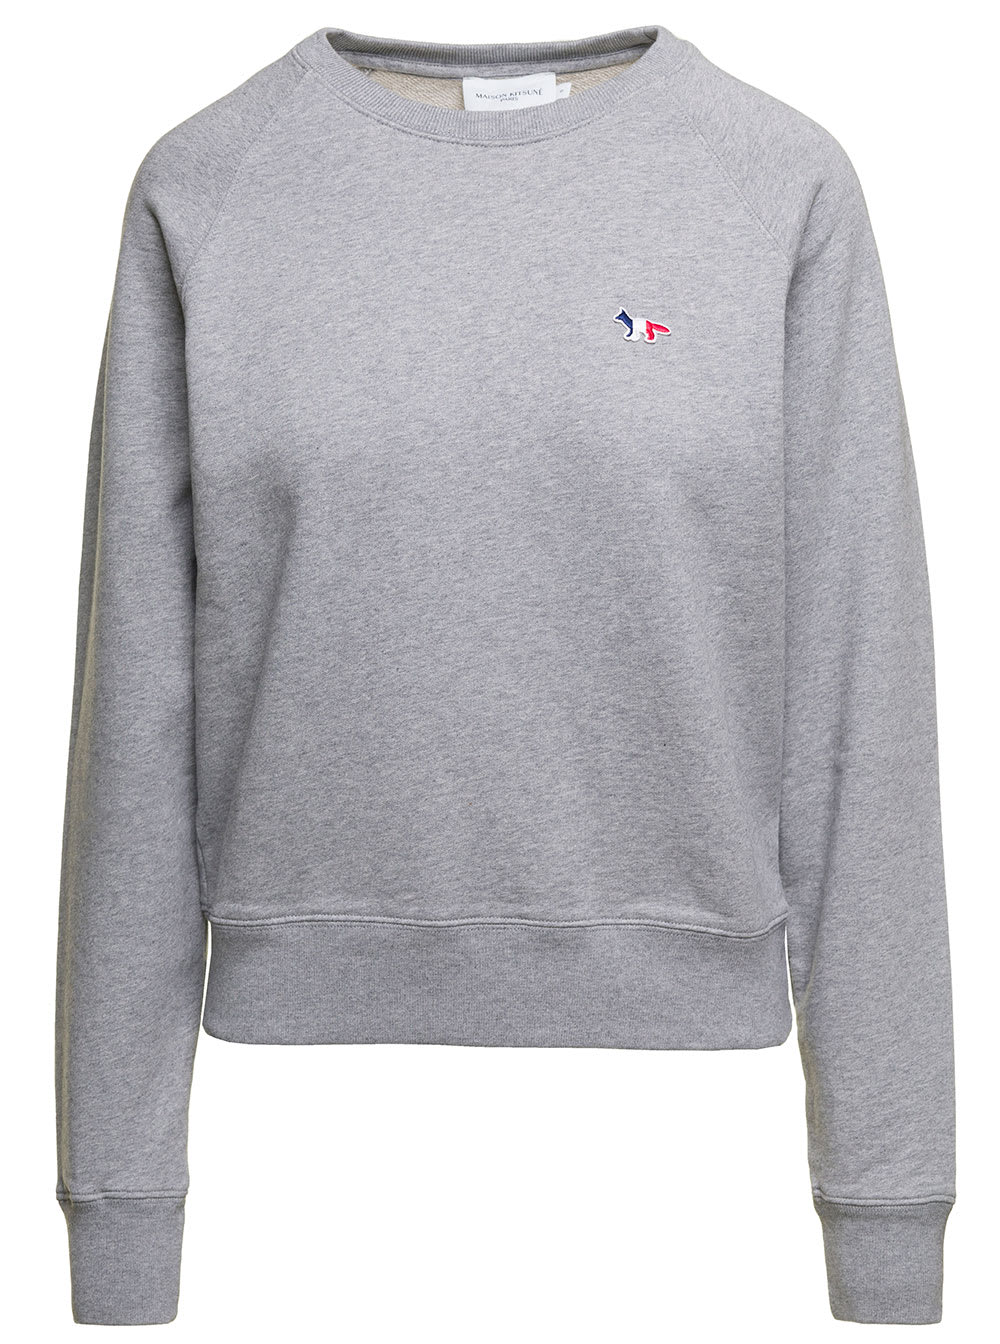 MAISON KITSUNÉ CREWNECK SWEATSHIRT WITH EMBROIDERED LOGO PATCH IN GREY COTTON WOMAN